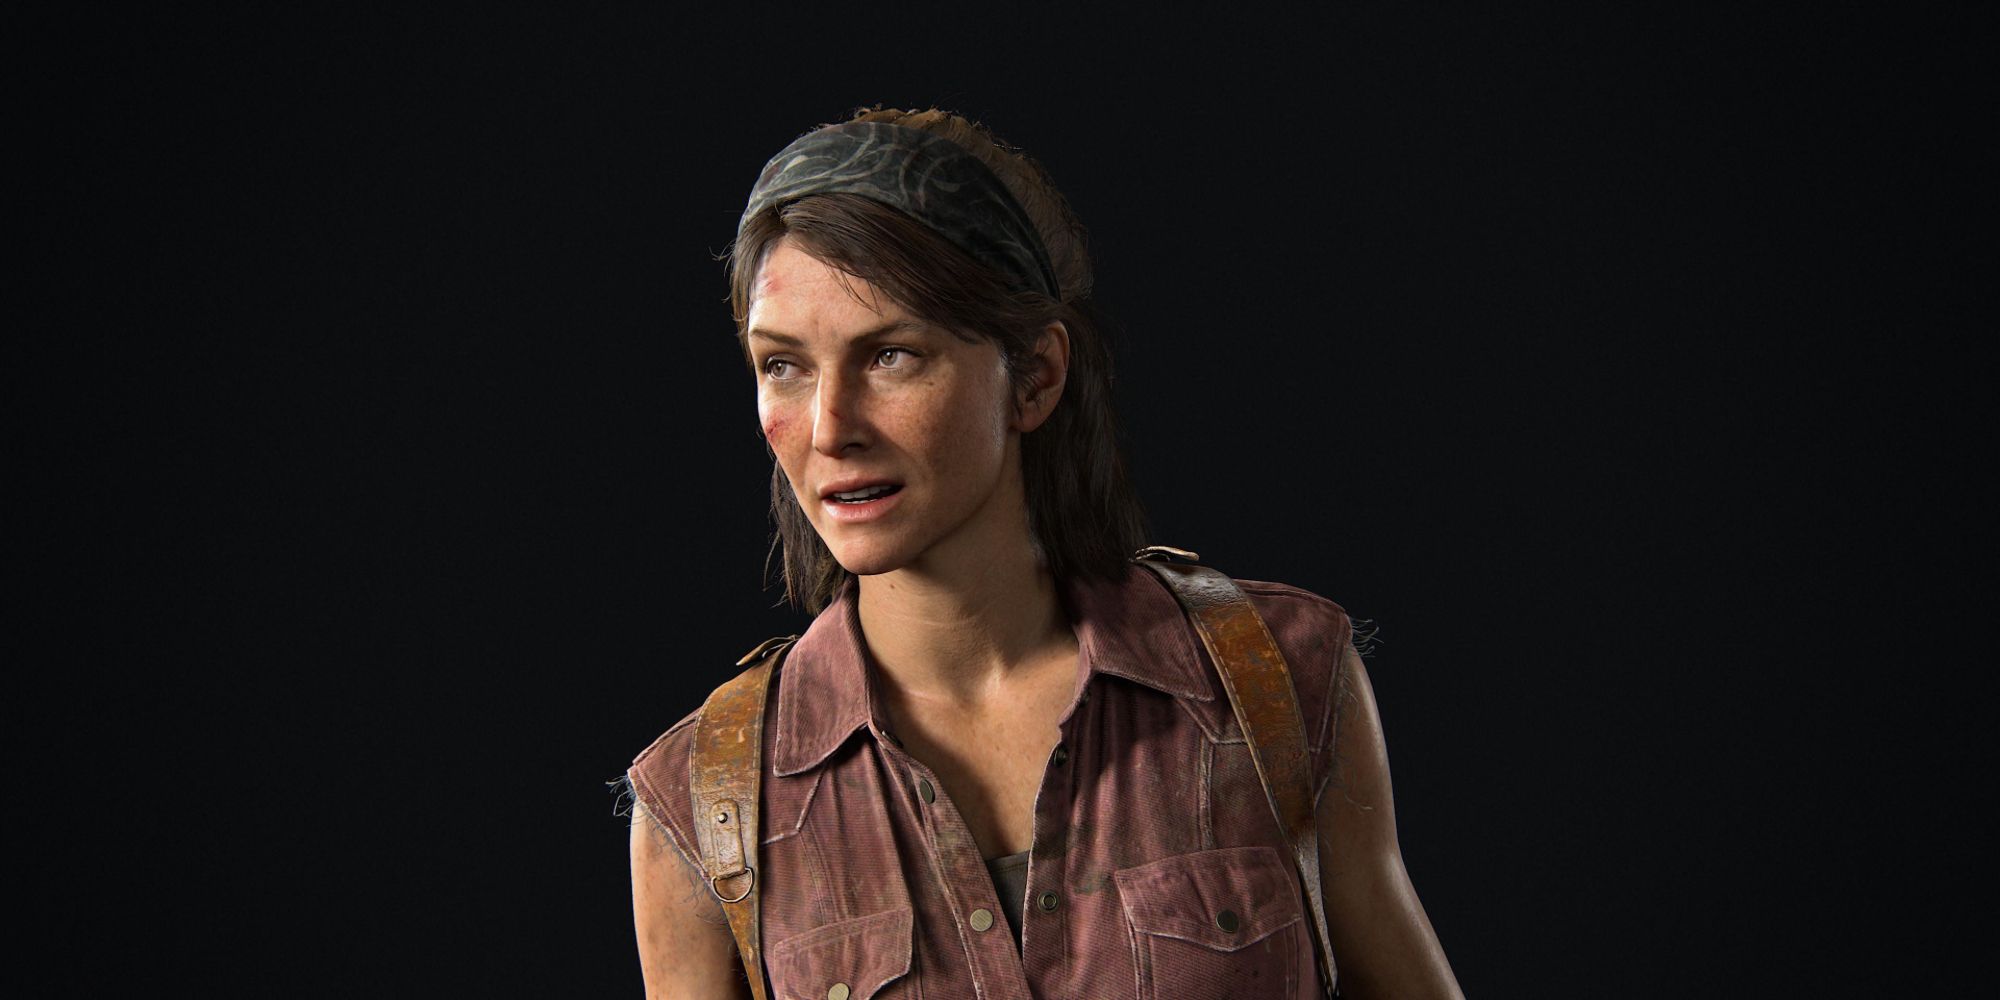 Tess, a character from The Last Of Us, looks off to the left with a steely gaze.